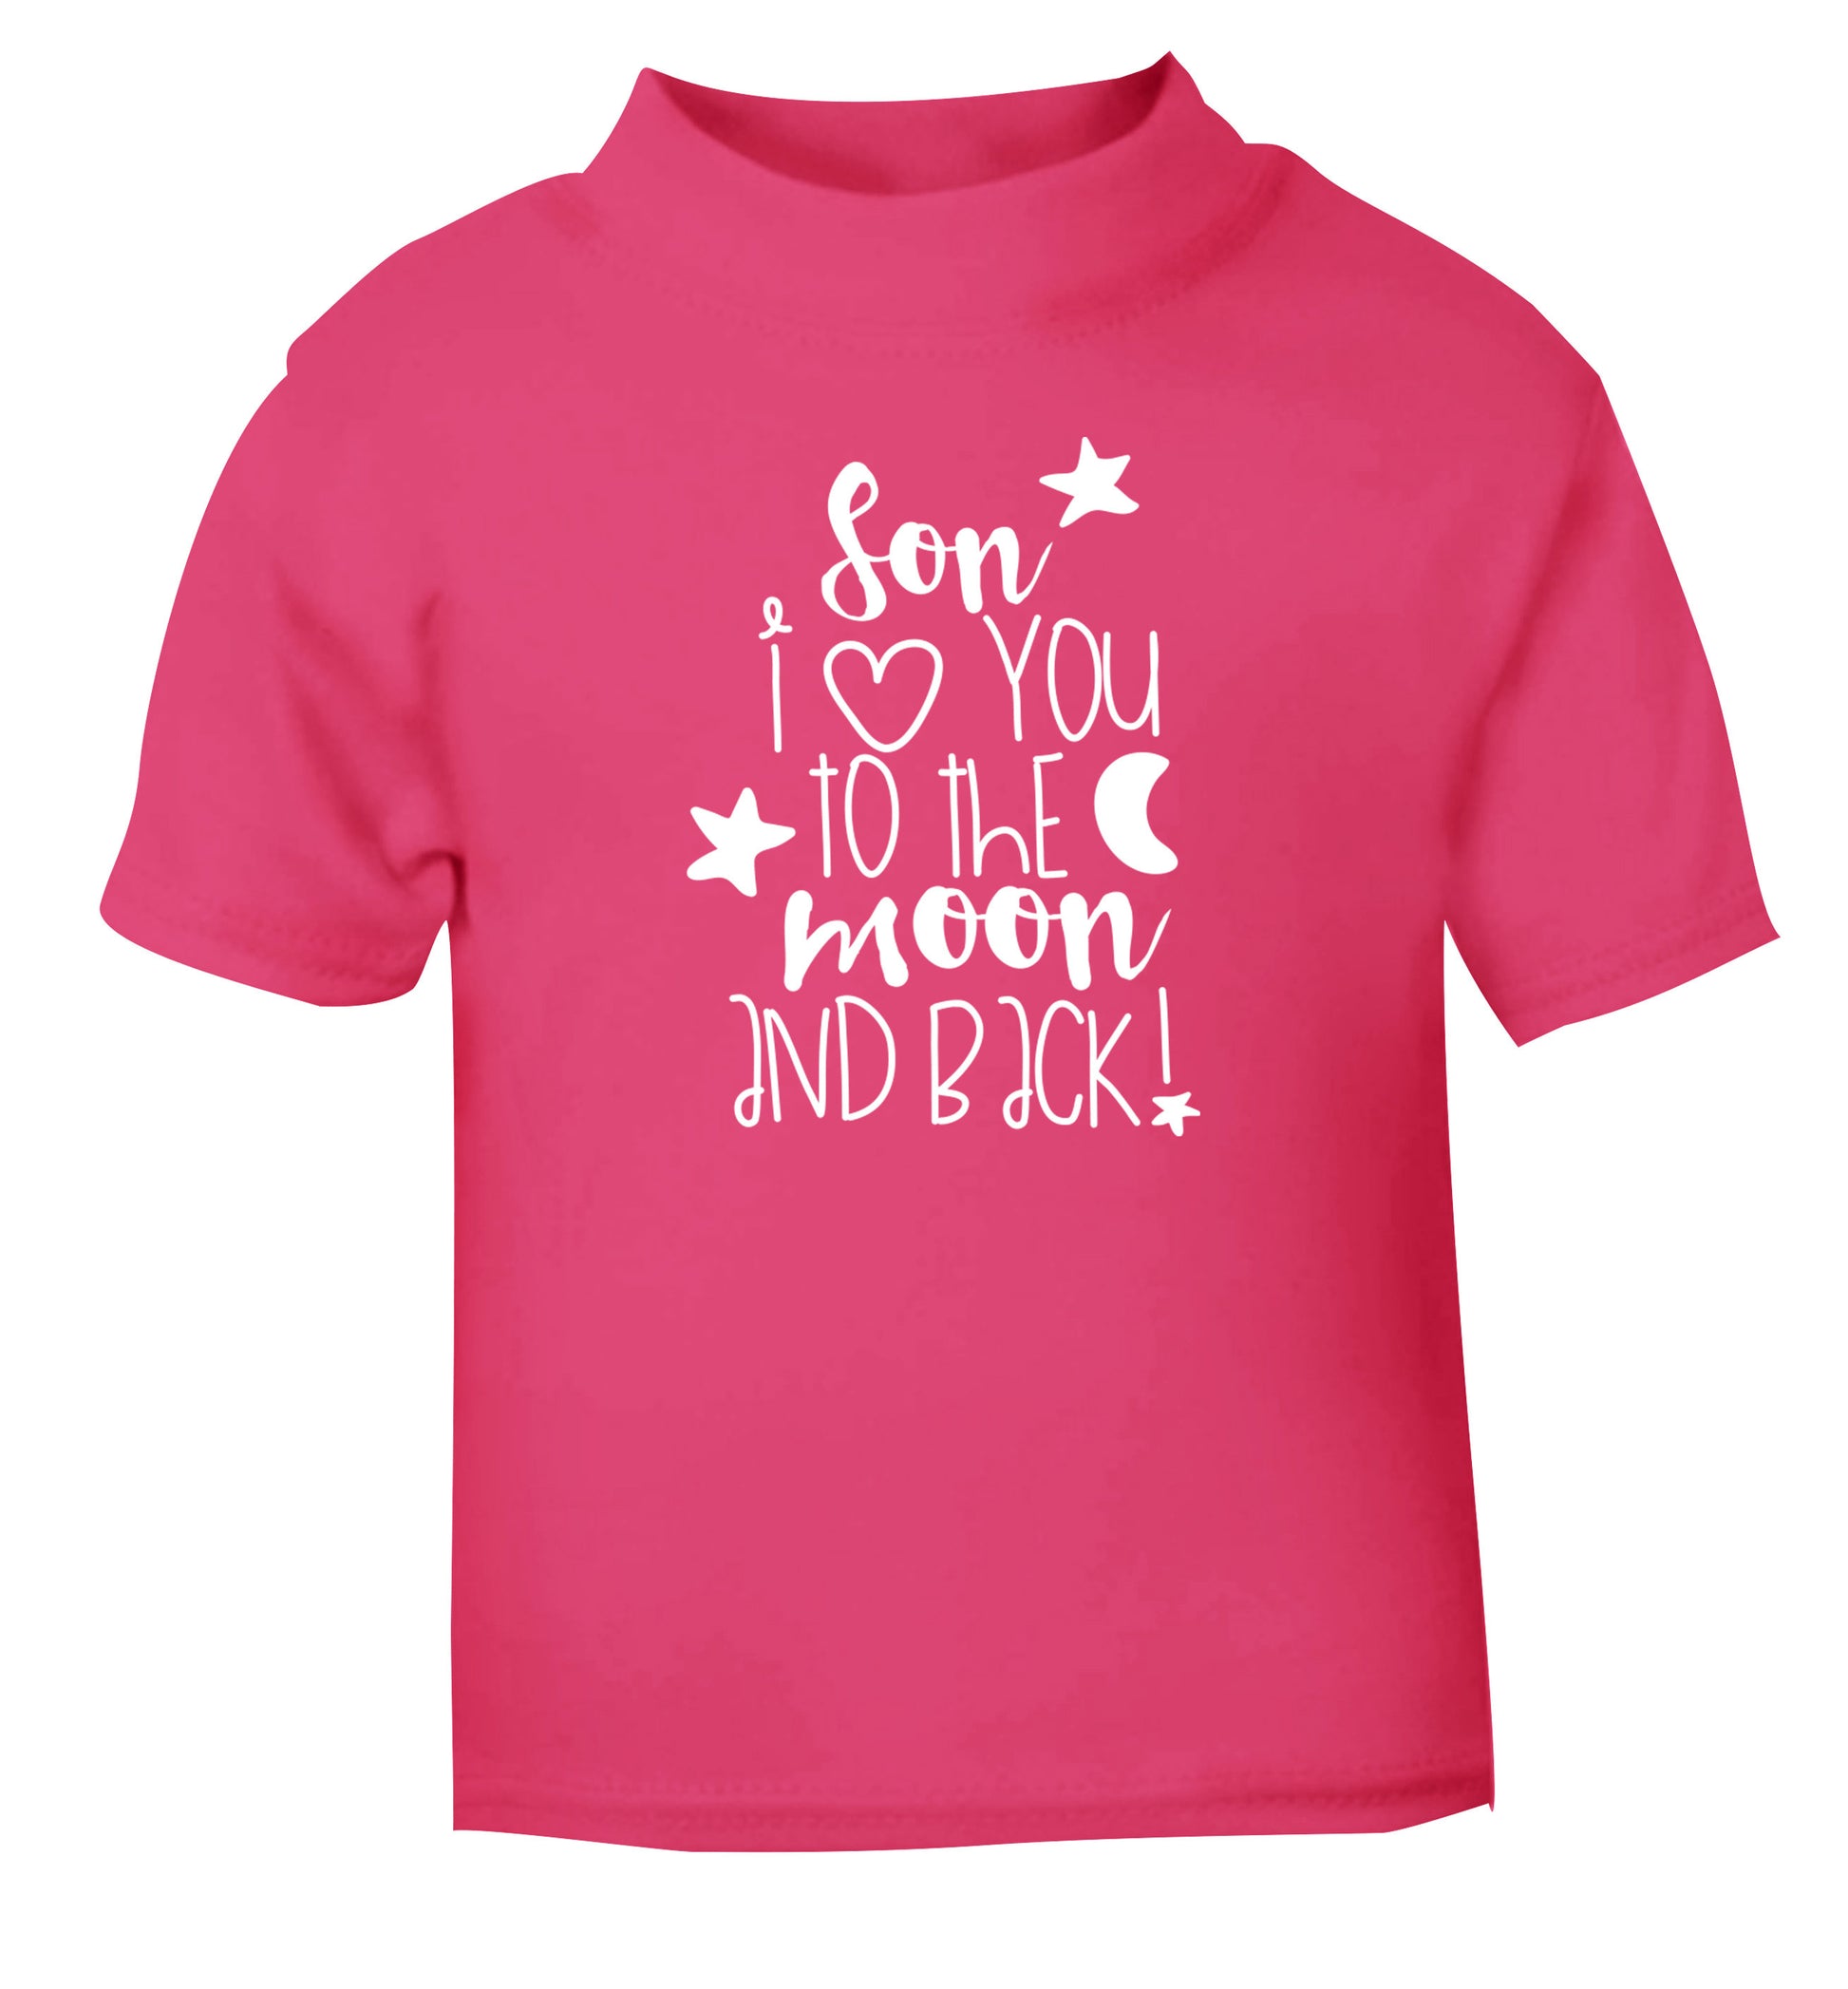 Son I love you to the moon and back pink Baby Toddler Tshirt 2 Years